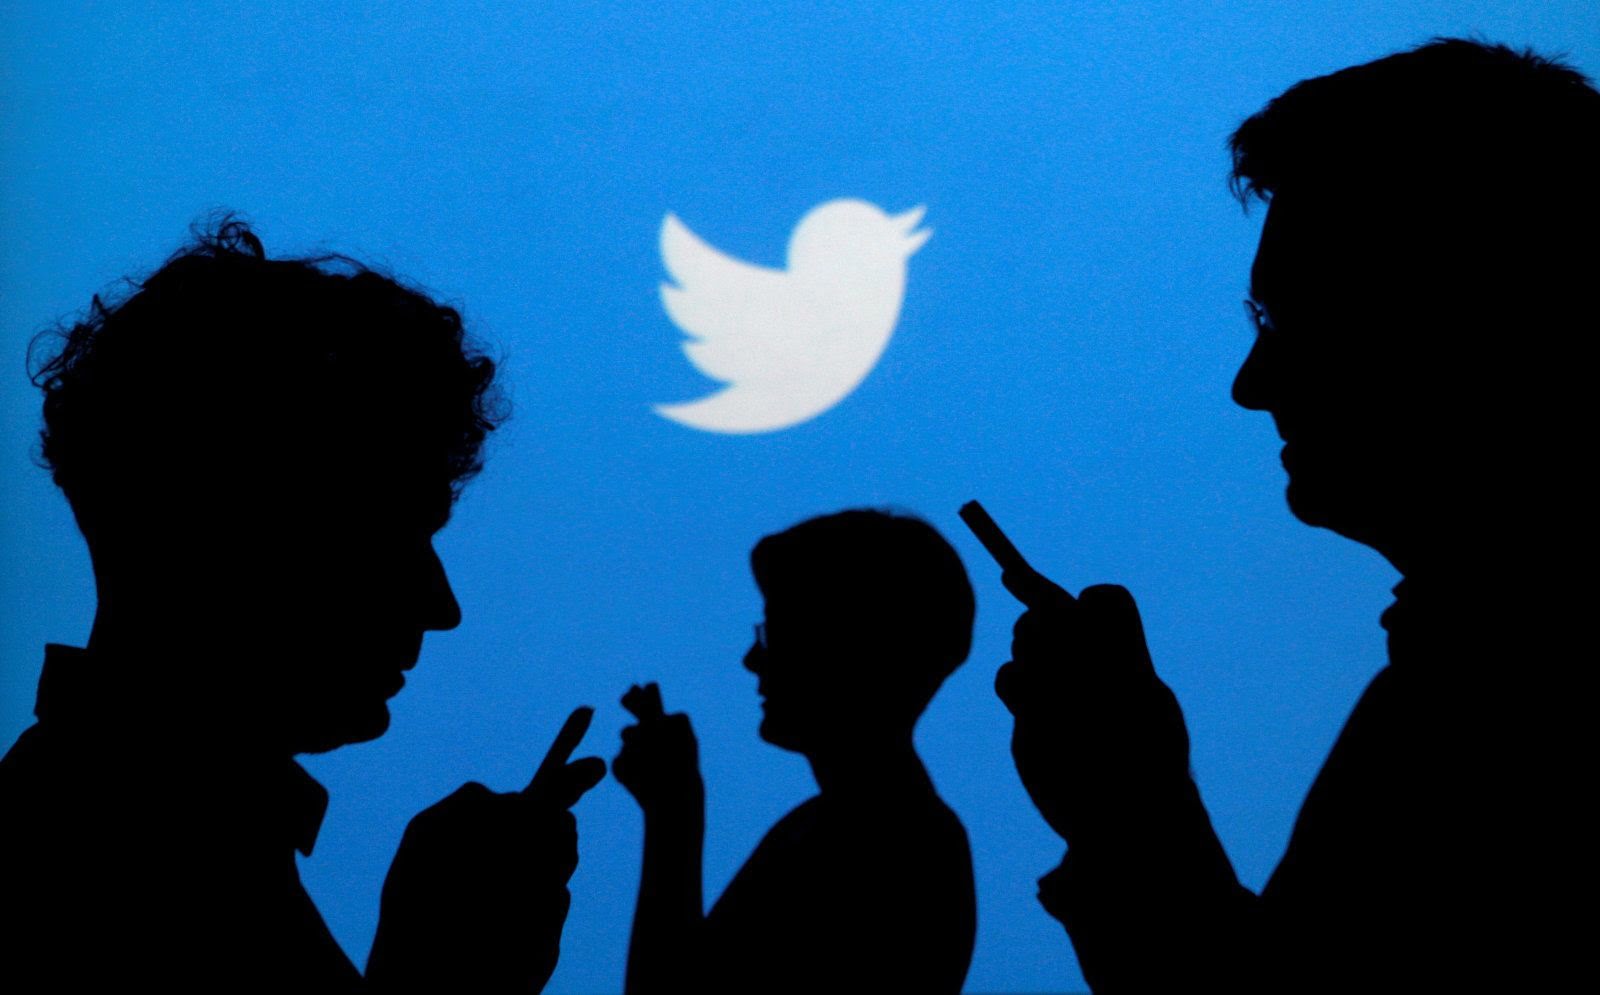 Twitter is taking action against hate crimes